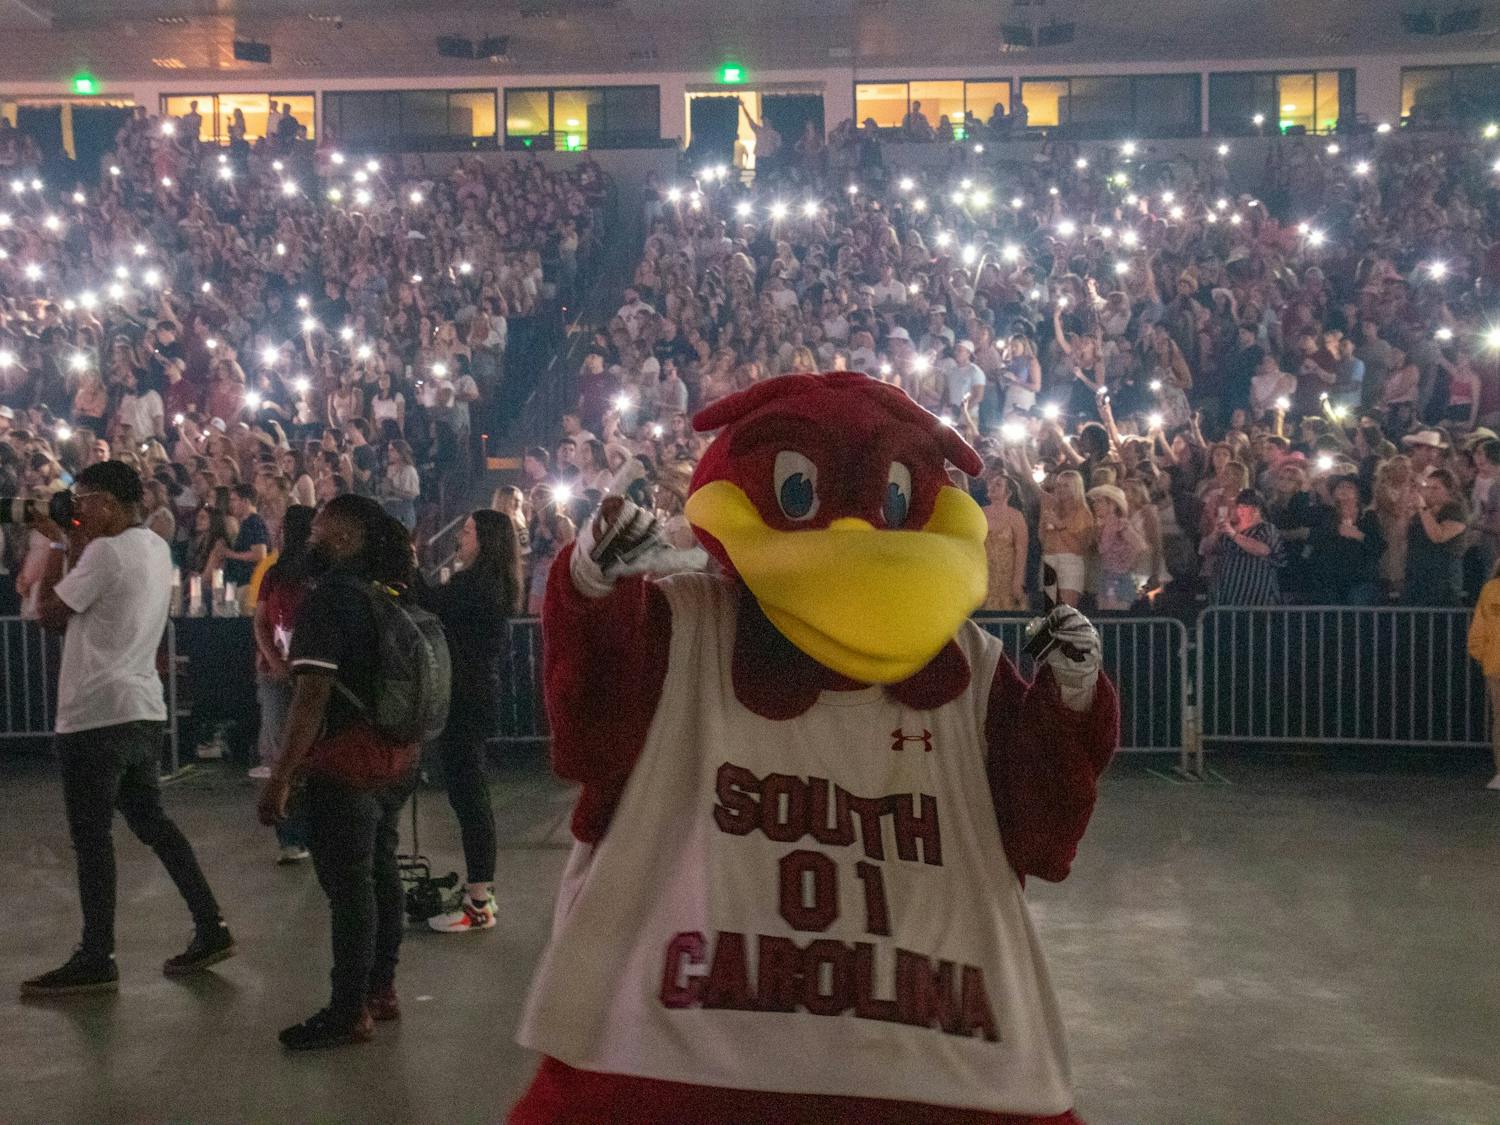 South Carolina students wave cell phone lights in the air to the beat of Darius Rucker’s hit “History in the Making” during a concert at Colonia Life Arena on April 24, 2022. The concert was held as a celebration for the women's basketball team.